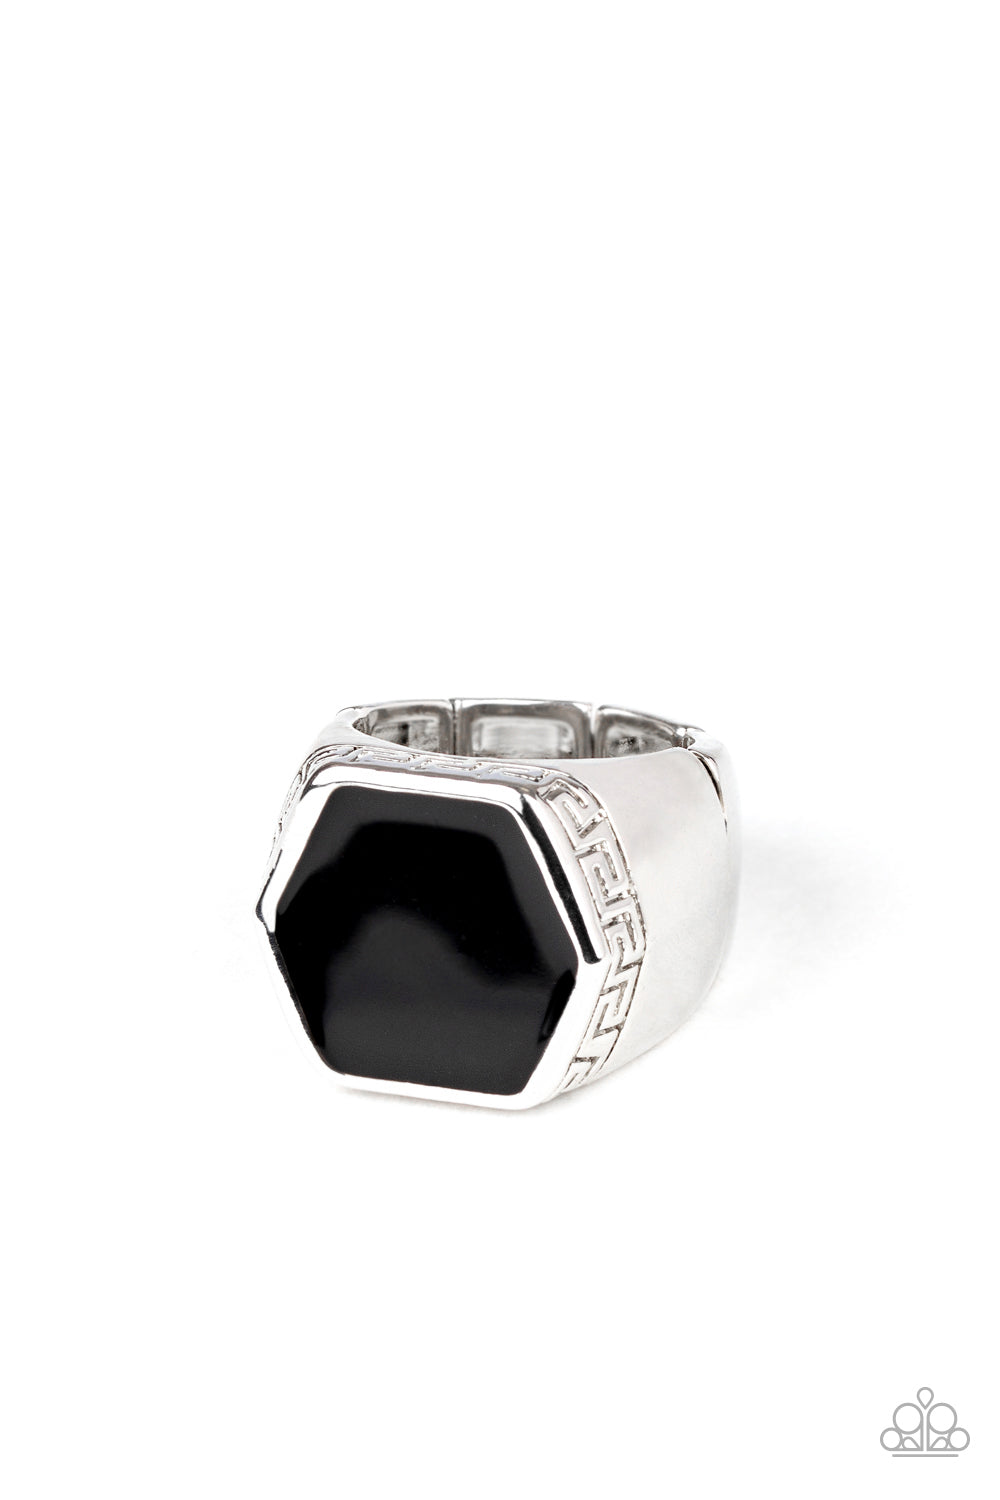 HEX Out - black - Paparazzi mens ring